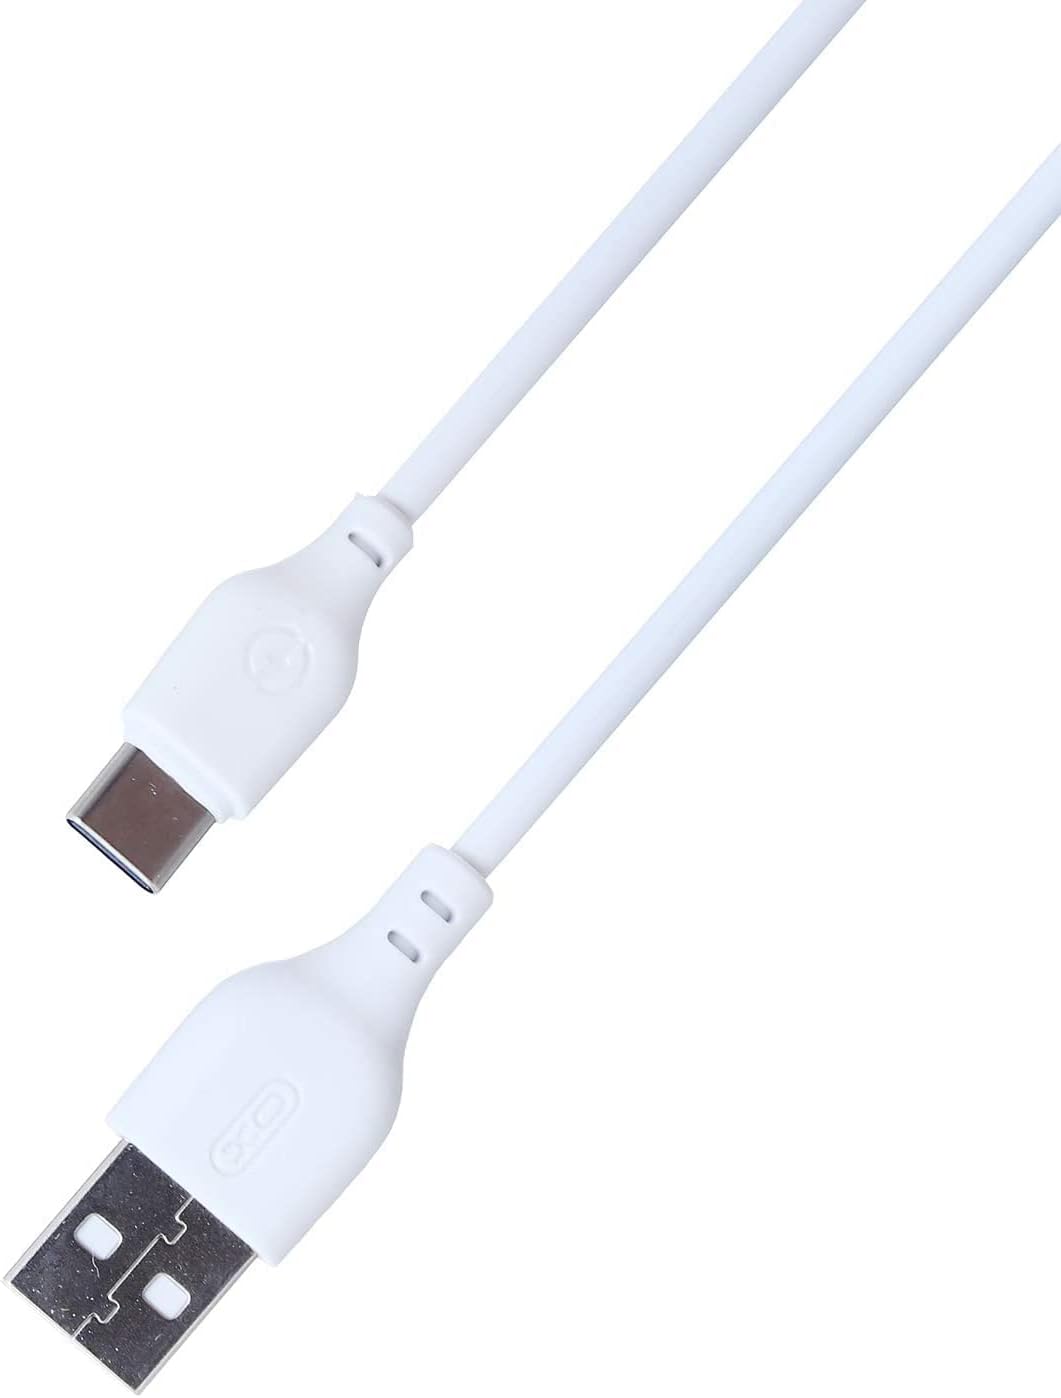 XO NB103 Type-C Cable 2.1A For Mobile Phones 1M - White